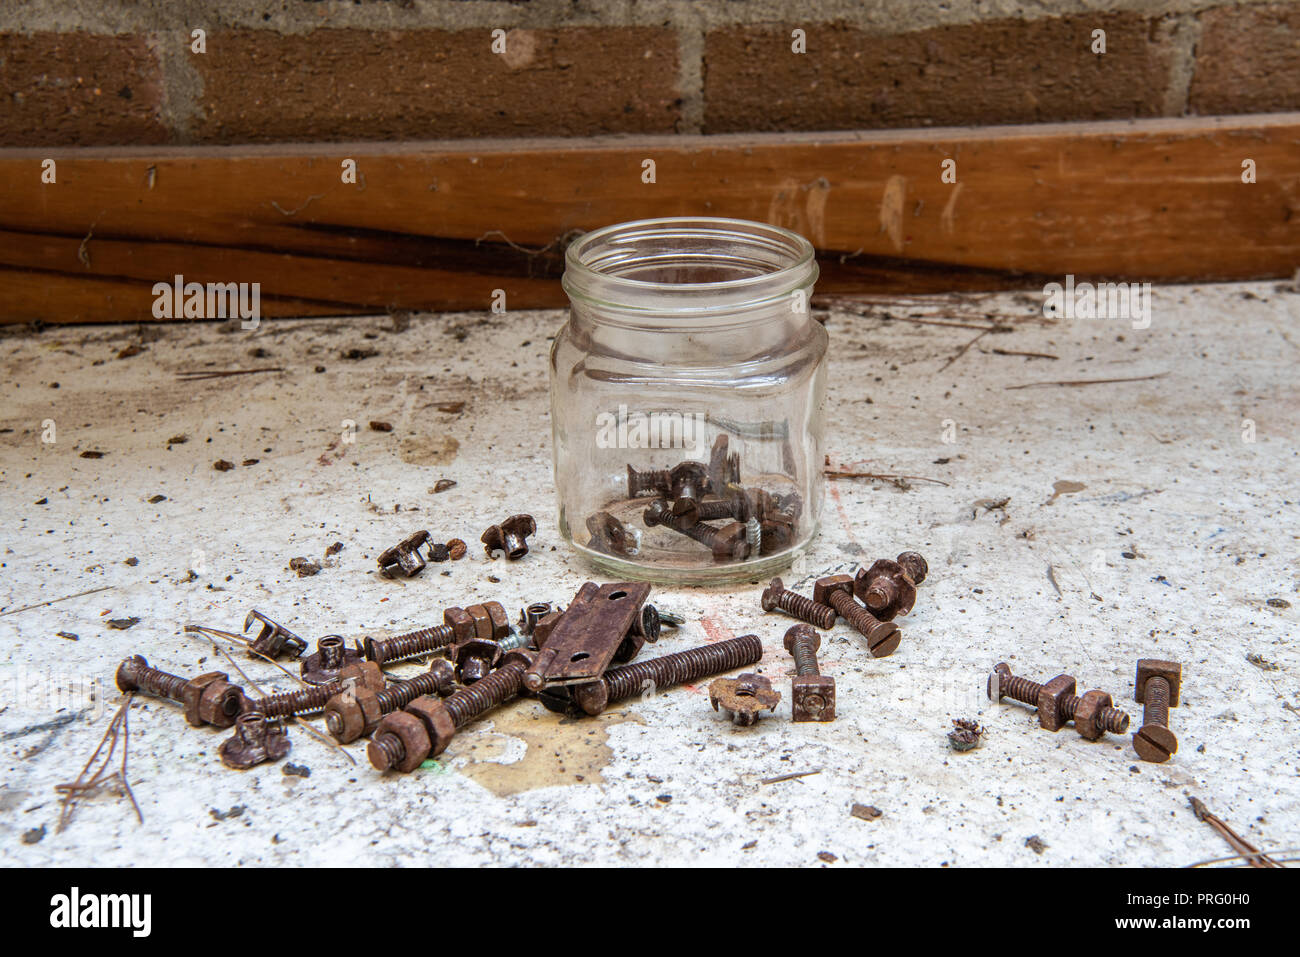 Jar of rusty bolts, nuts, hinges and washers on a workshop bench. Stock Photo